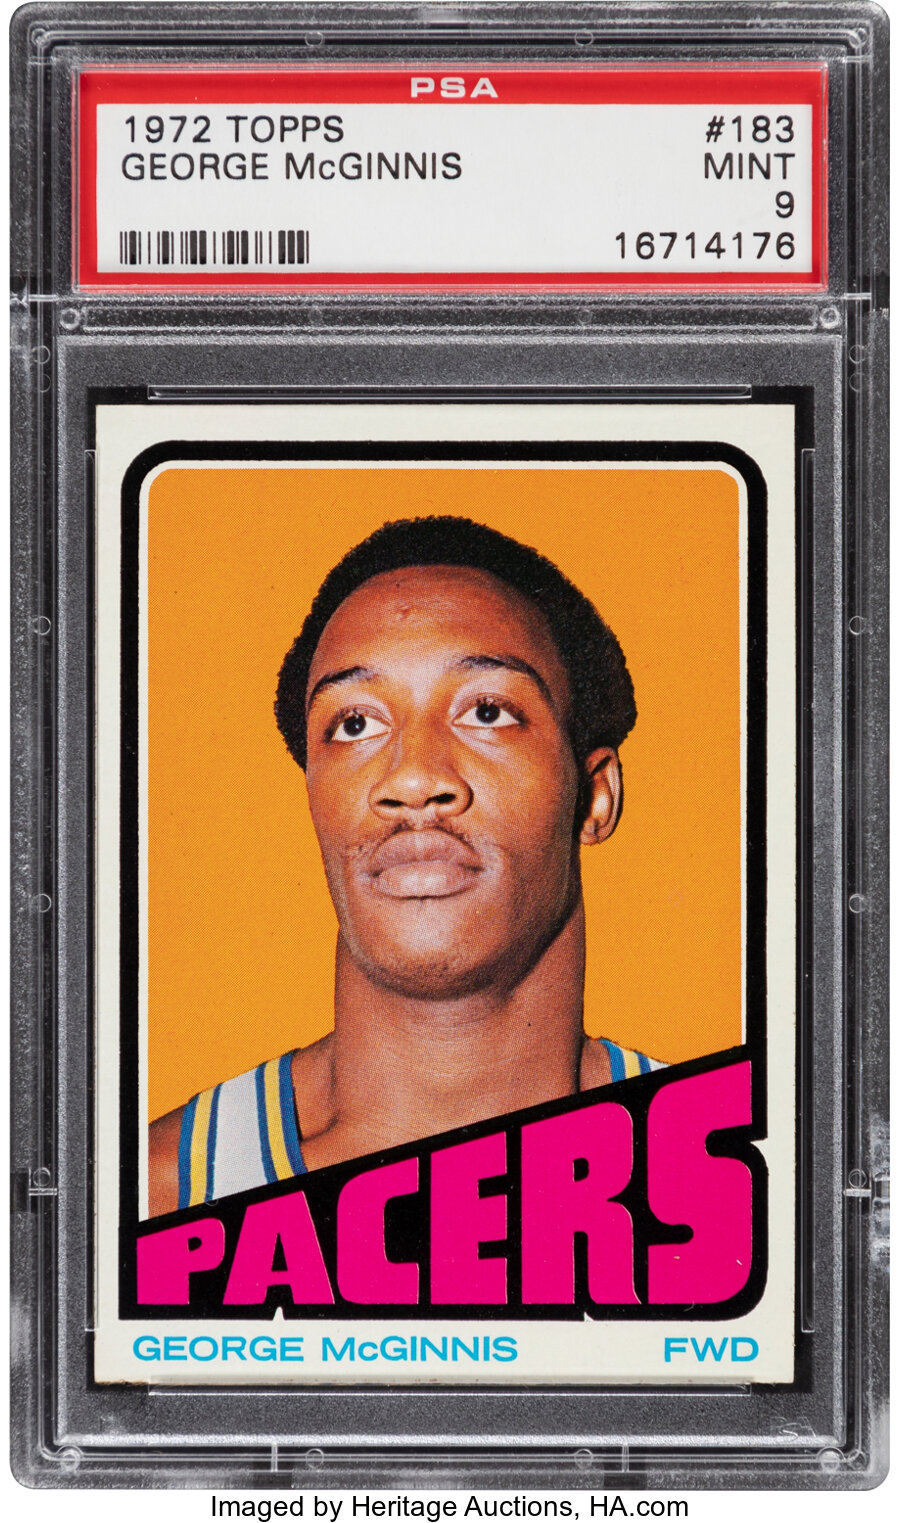 1972 Topps George McGinnis #183 PSA Mint 9 - None Higher